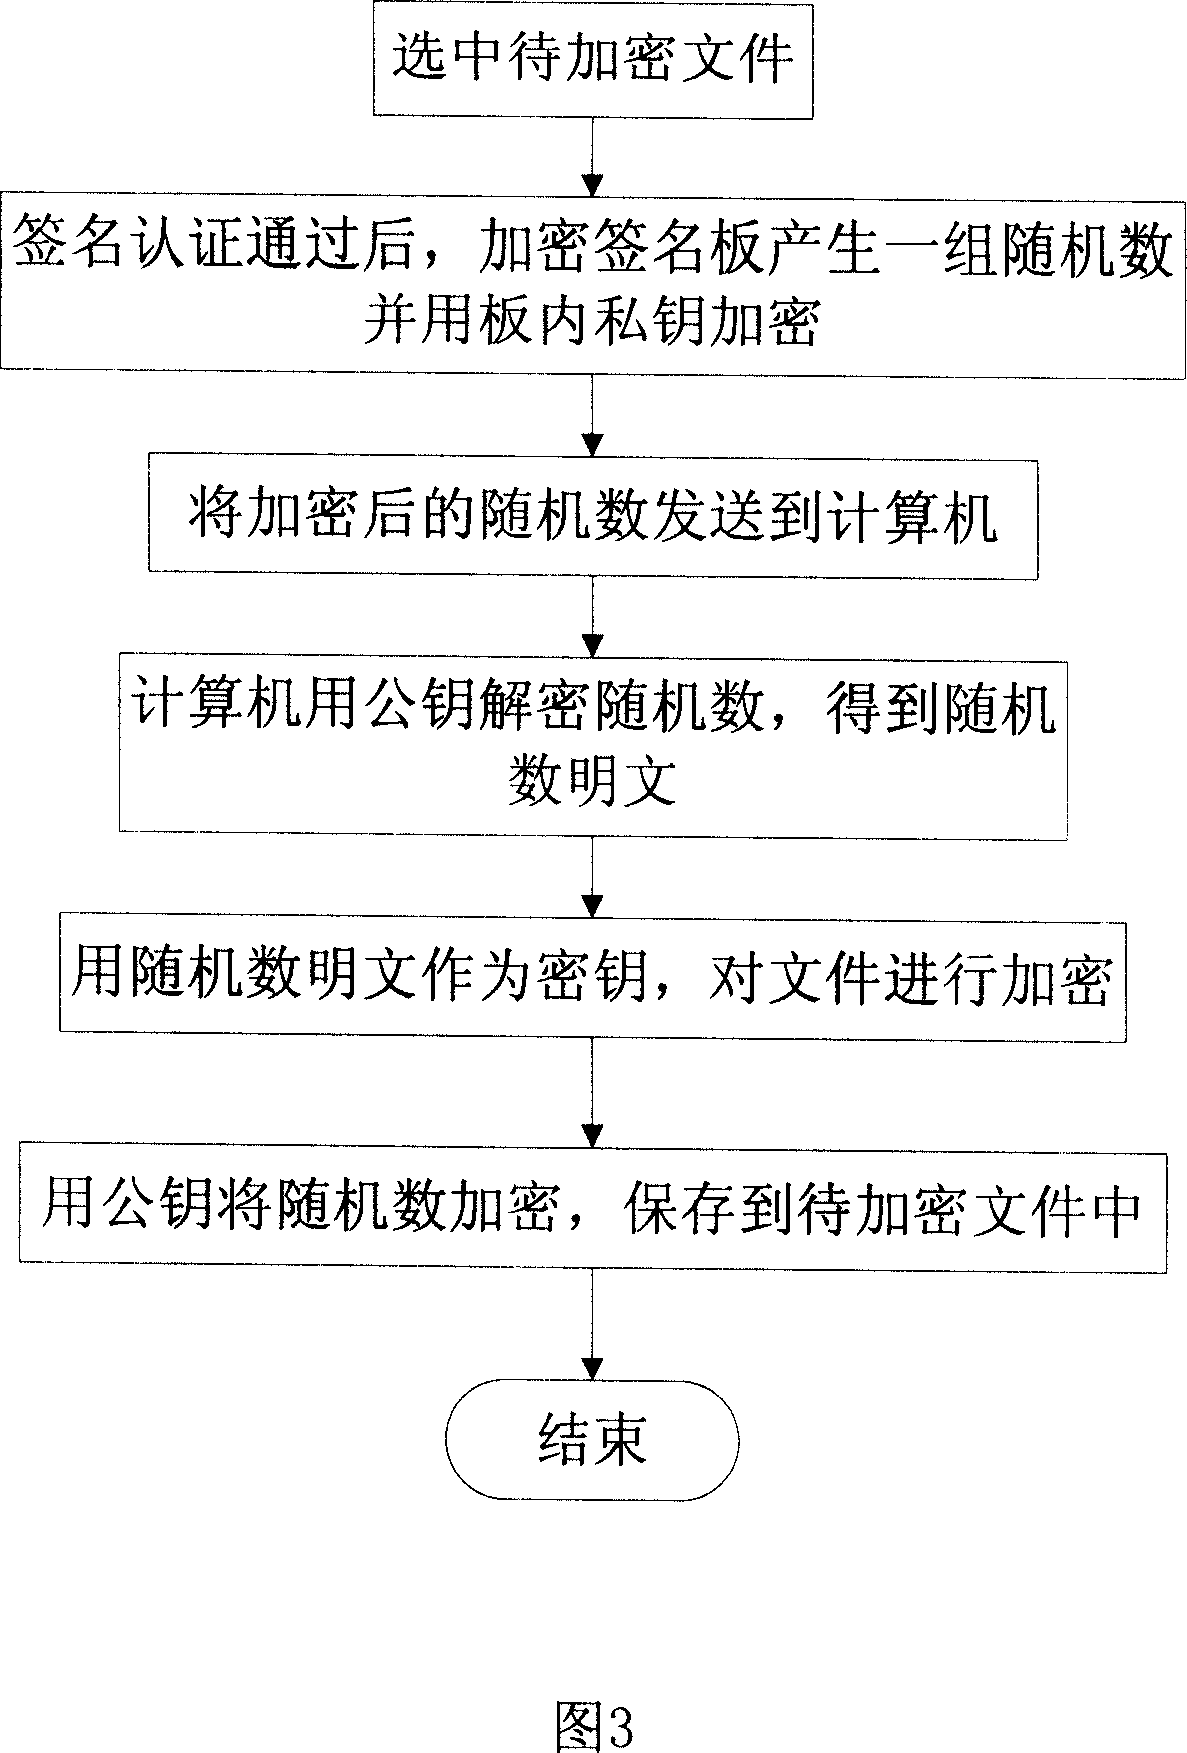 Enciphered sign board and composite encryption signing method